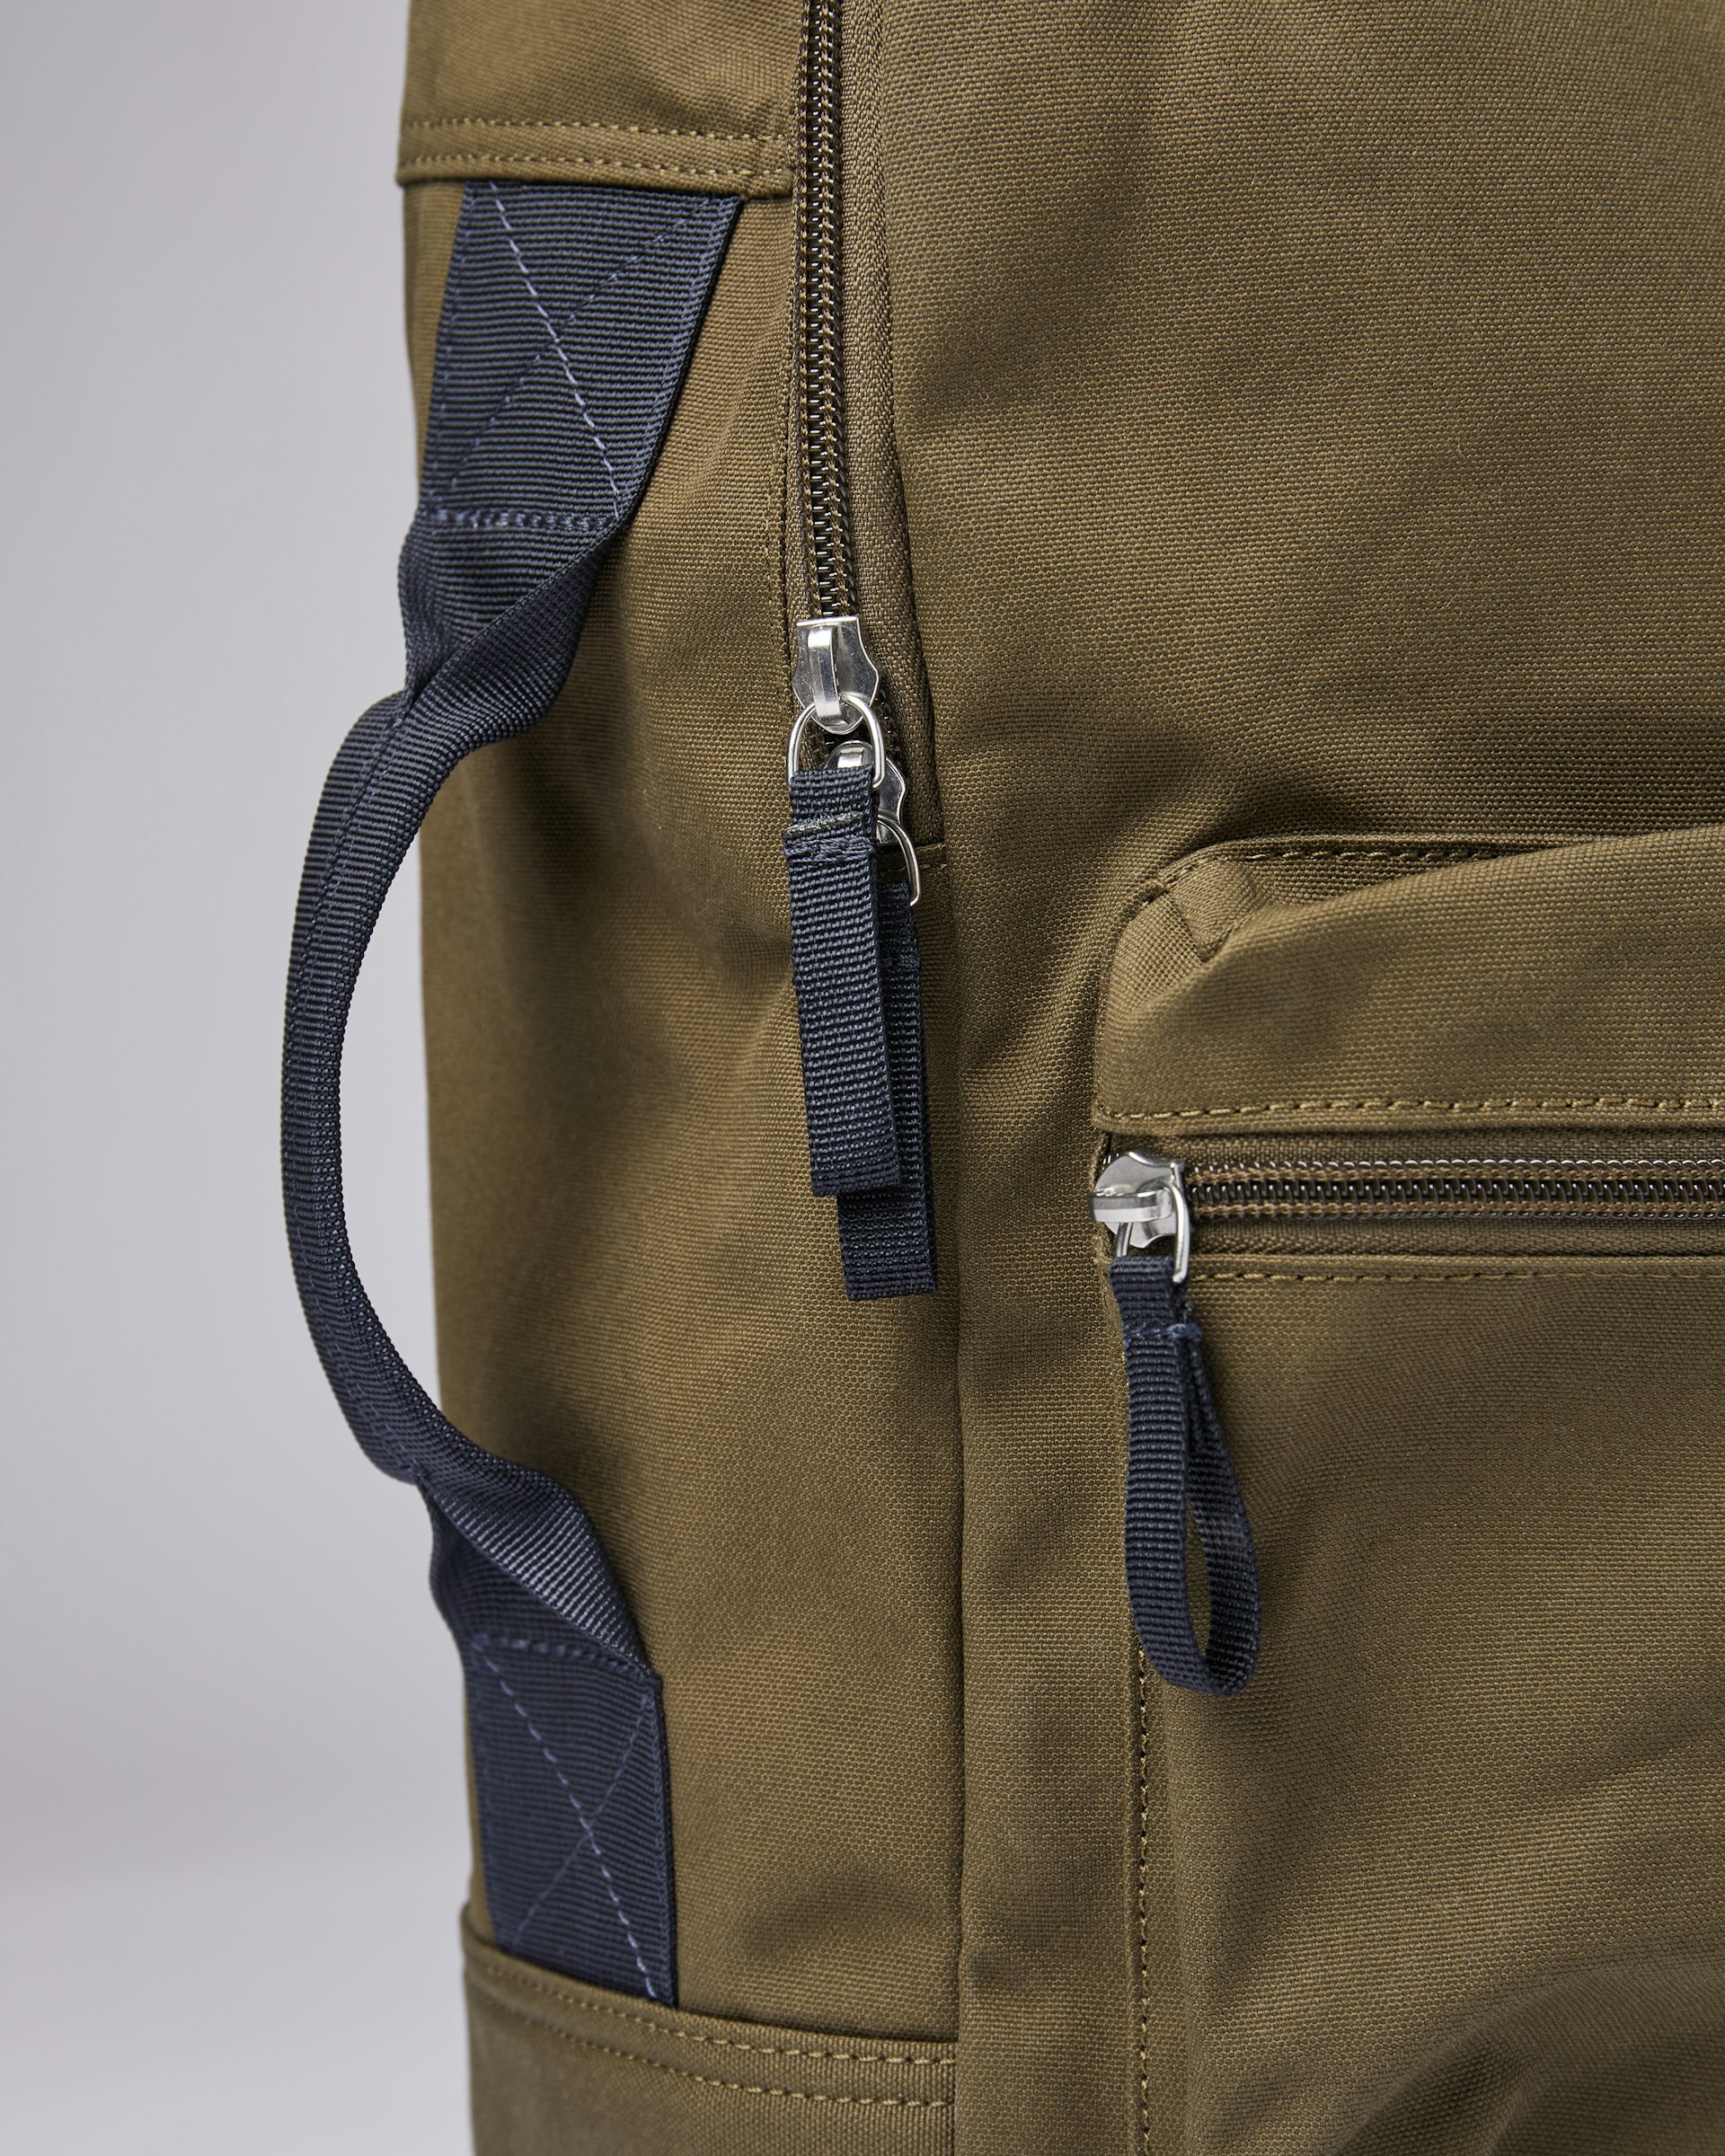 August belongs to the category Backpacks and is in color olive (3 of 4)